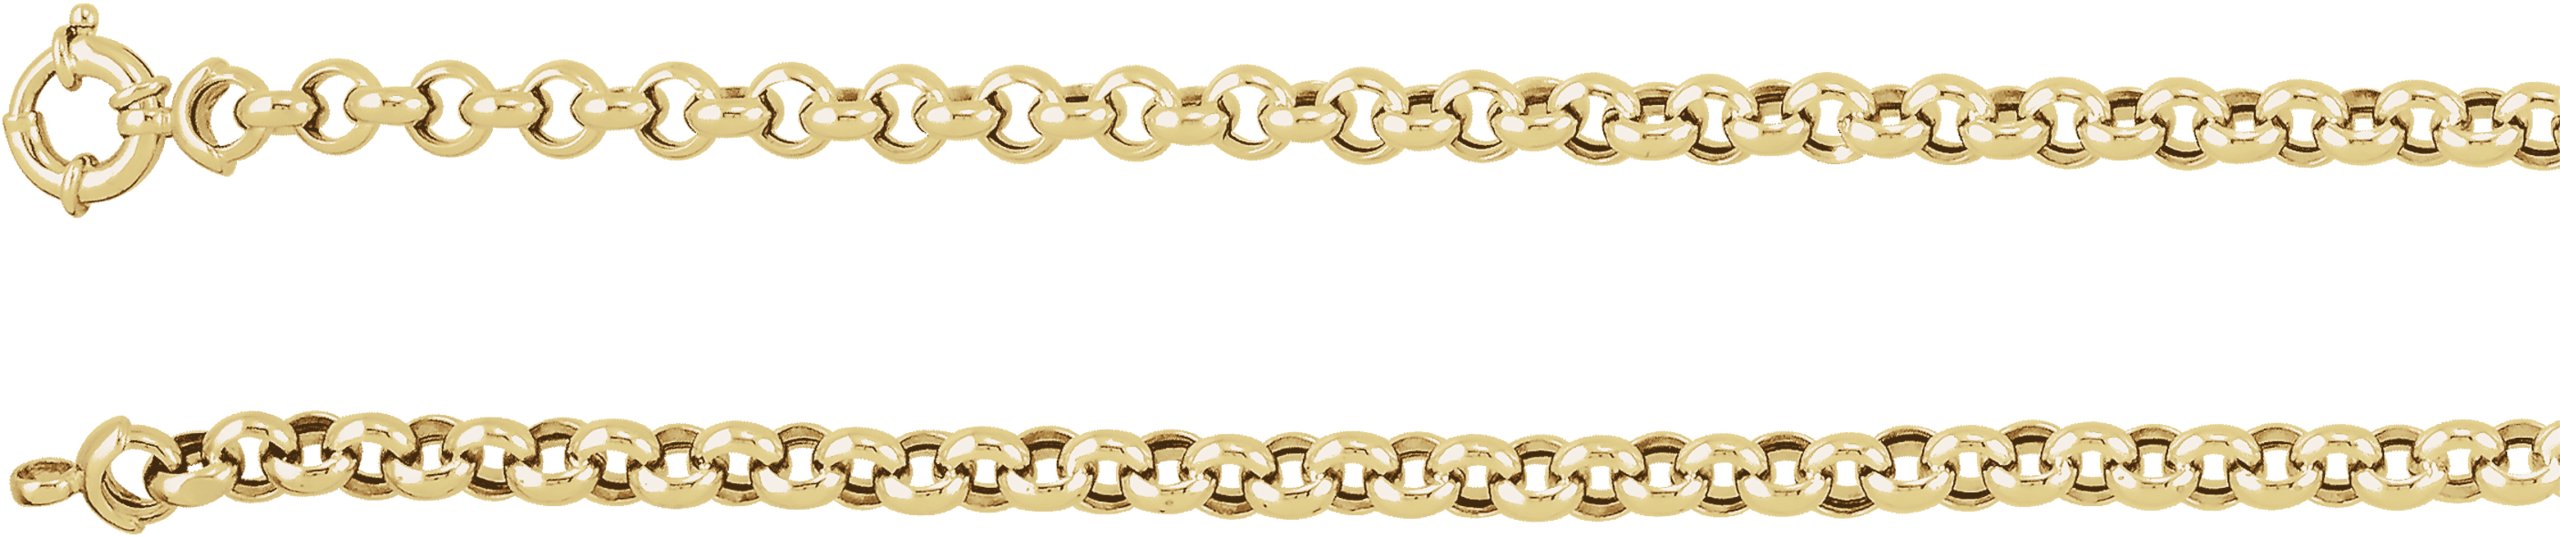 14K Yellow 6.5 mm Hollow Rolo 16" Chain
